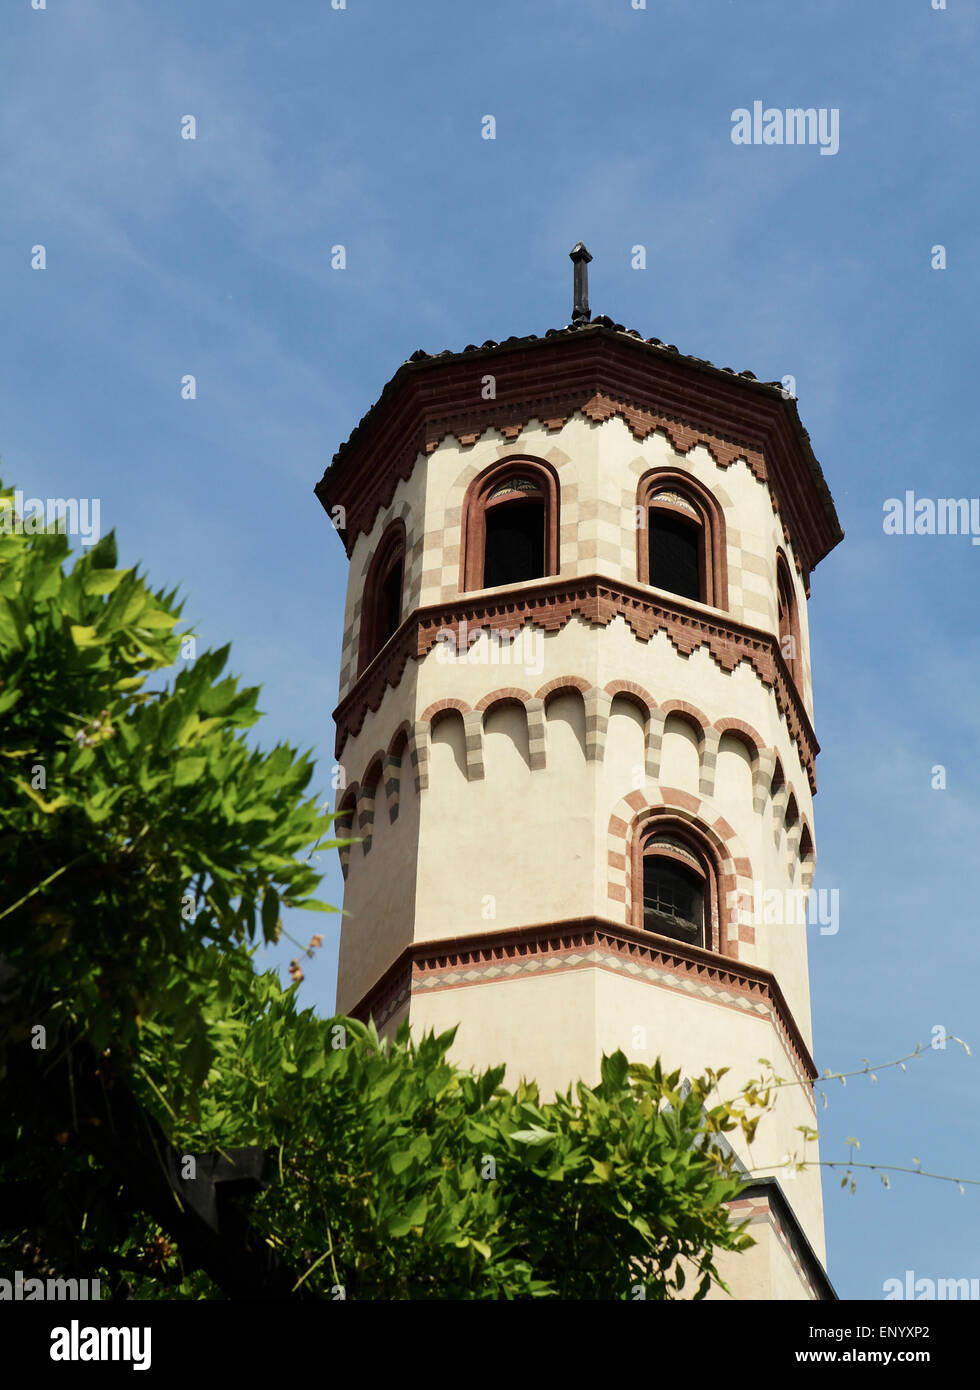 The tower of a recreated medieval castle in Turin Stock Photo